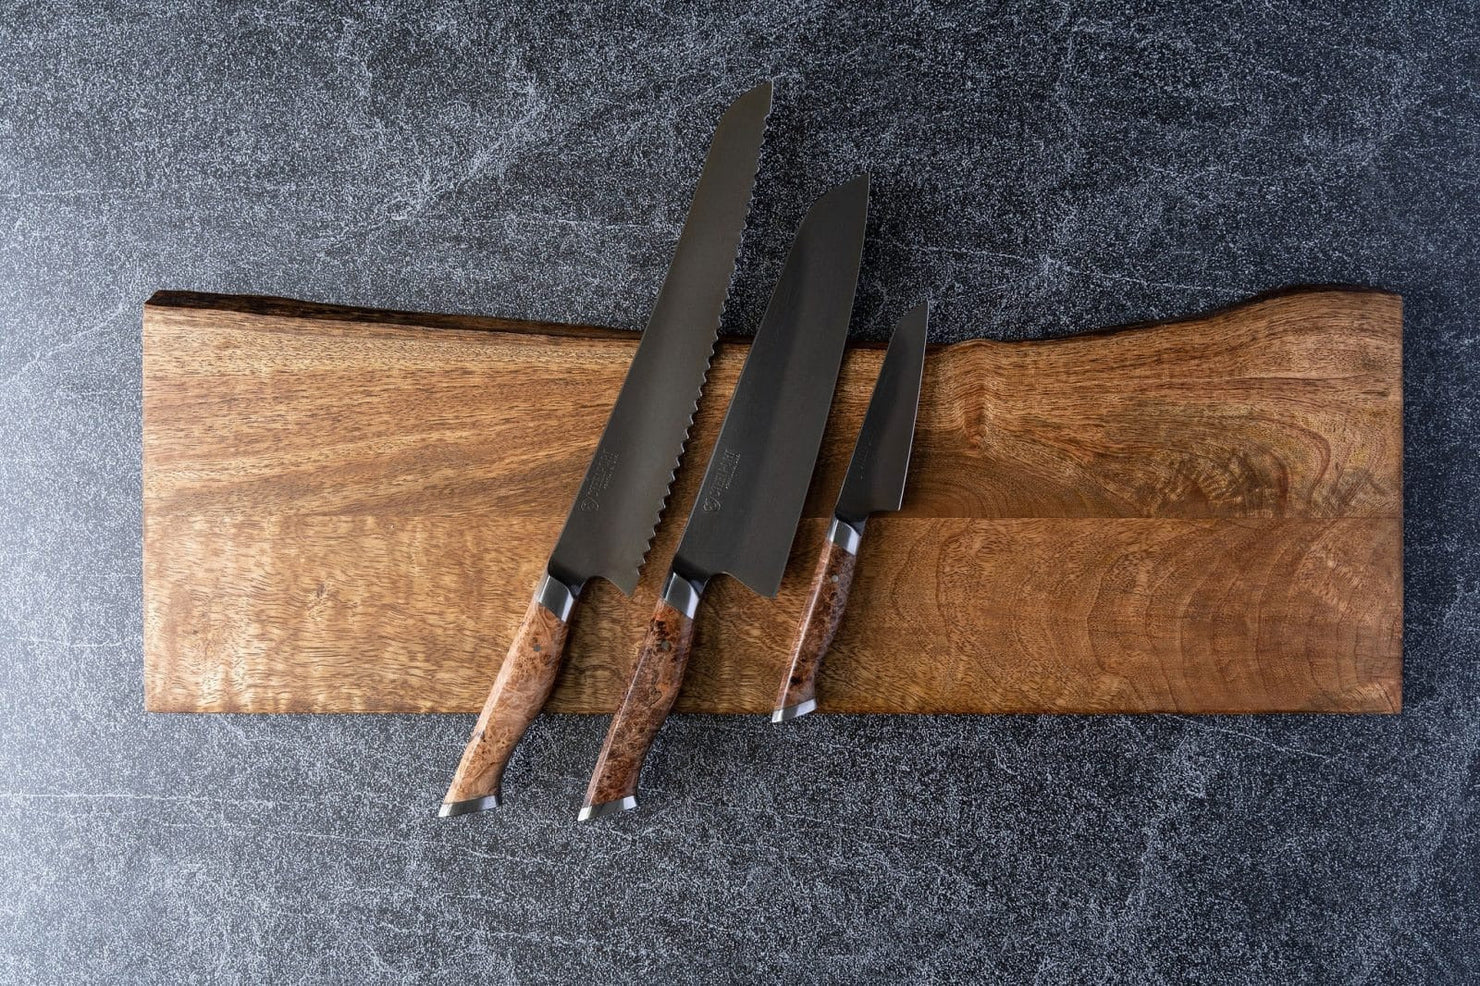 Are Wood Cutting Boards Safe? — Sirr's Furniture